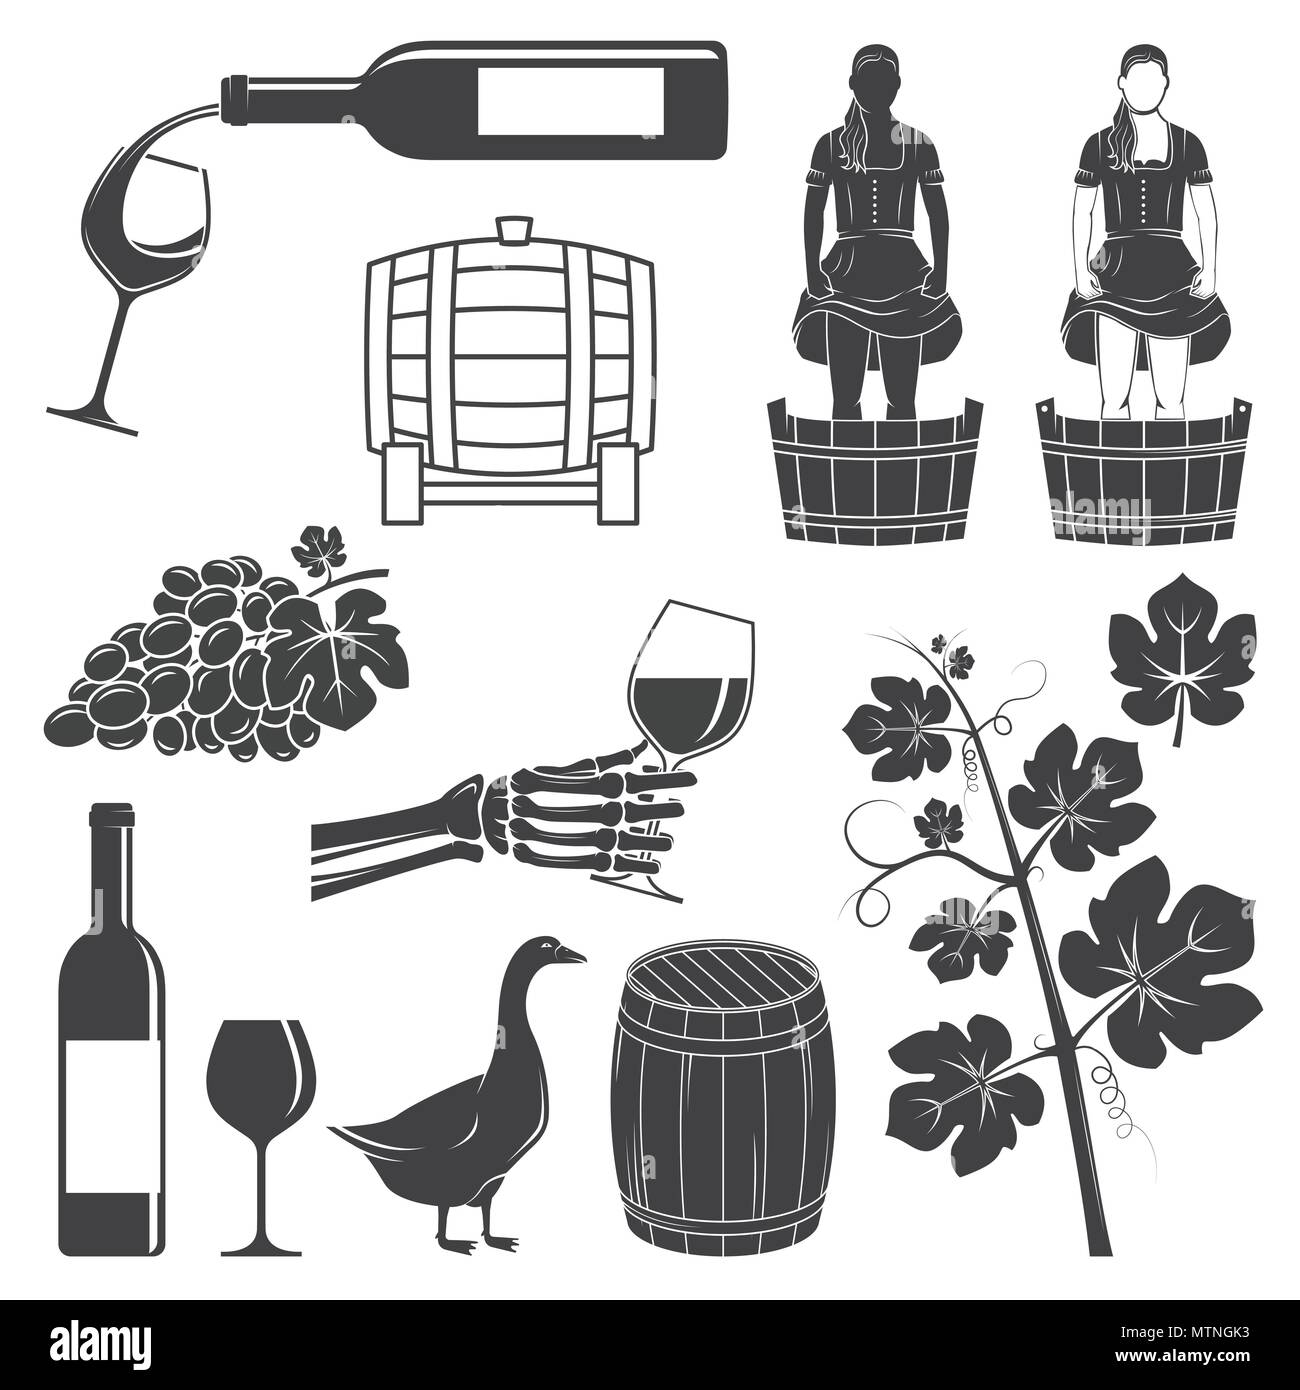 Set of Wine silhouette icons. Set include girl stomping, crushing grapes, barrel, goose, grape with leaf, branch and bottle, glass of wine. Icons for winery company business. Vector illustration. Stock Vector